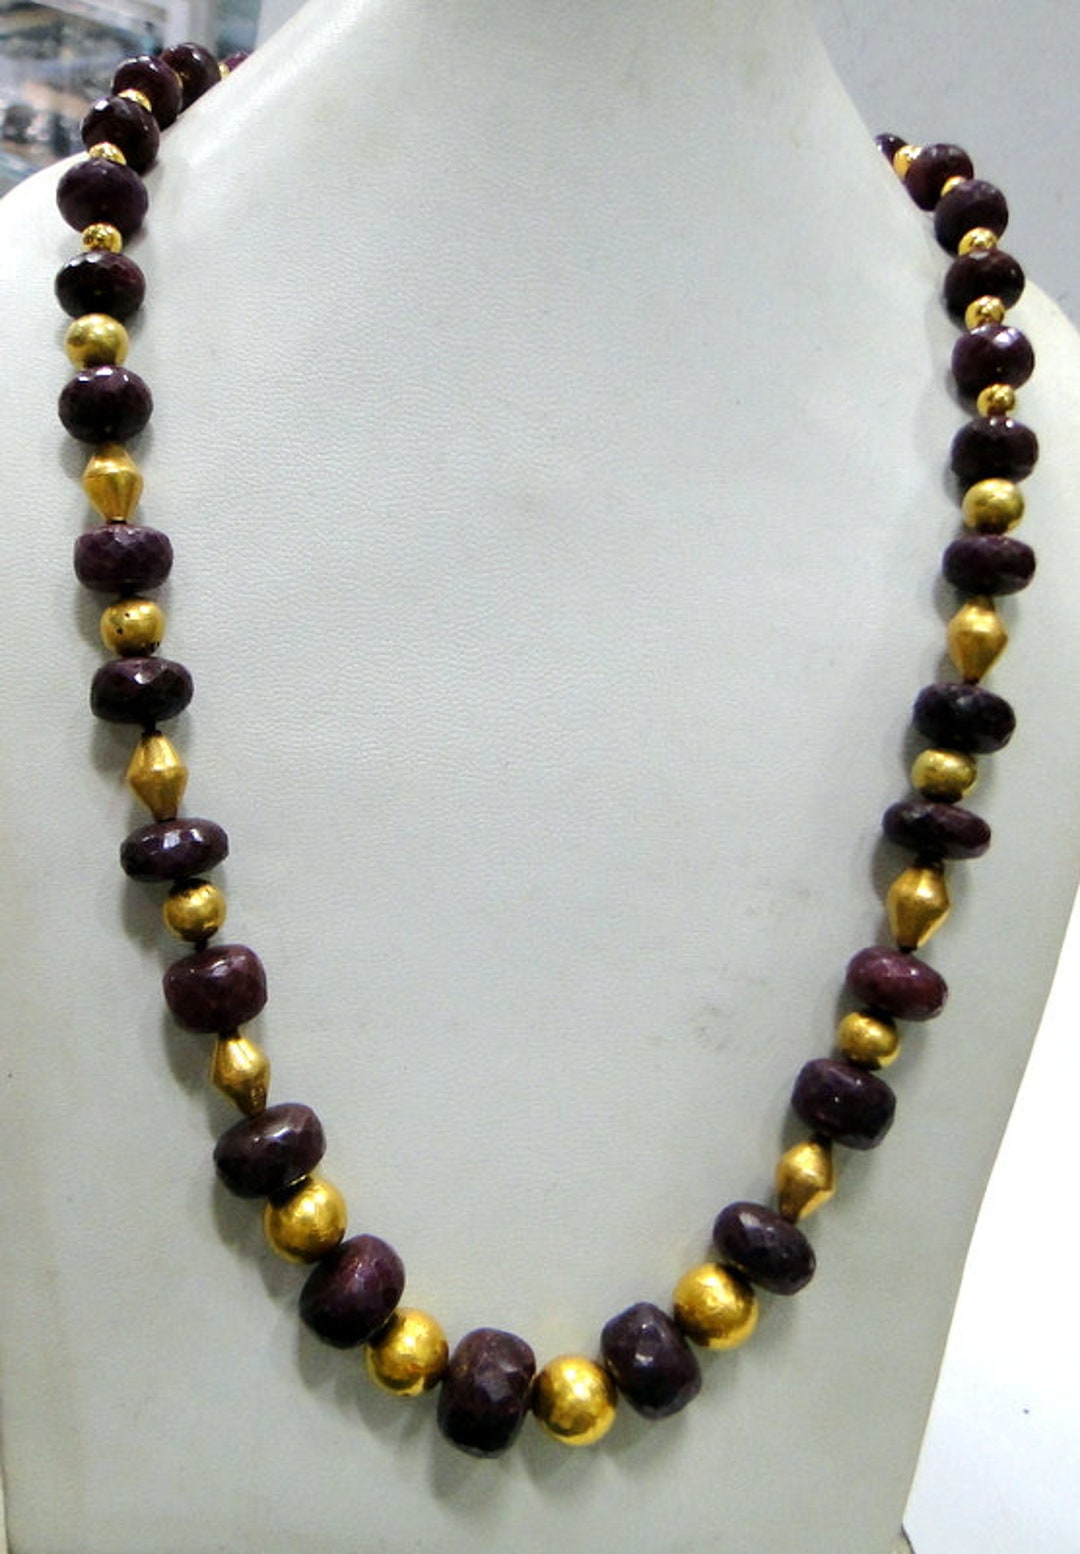 Ruby & 22K Gold Beads Necklace Strand Jewellery Free Shipping - Etsy